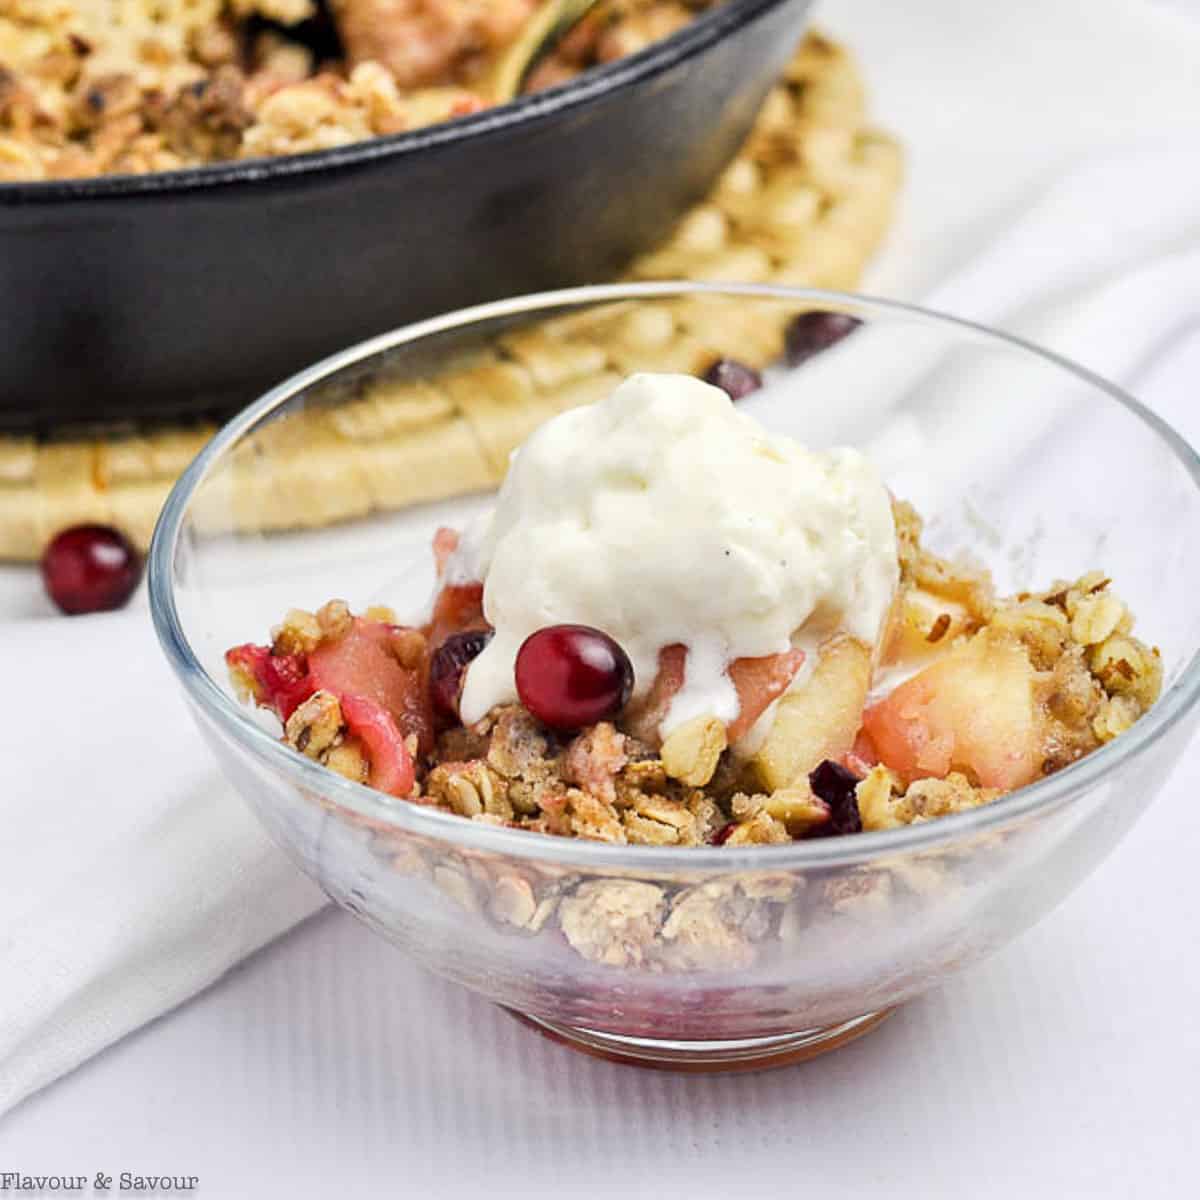 A glass dessert bowl with cranberry apple crisp and ice cream.